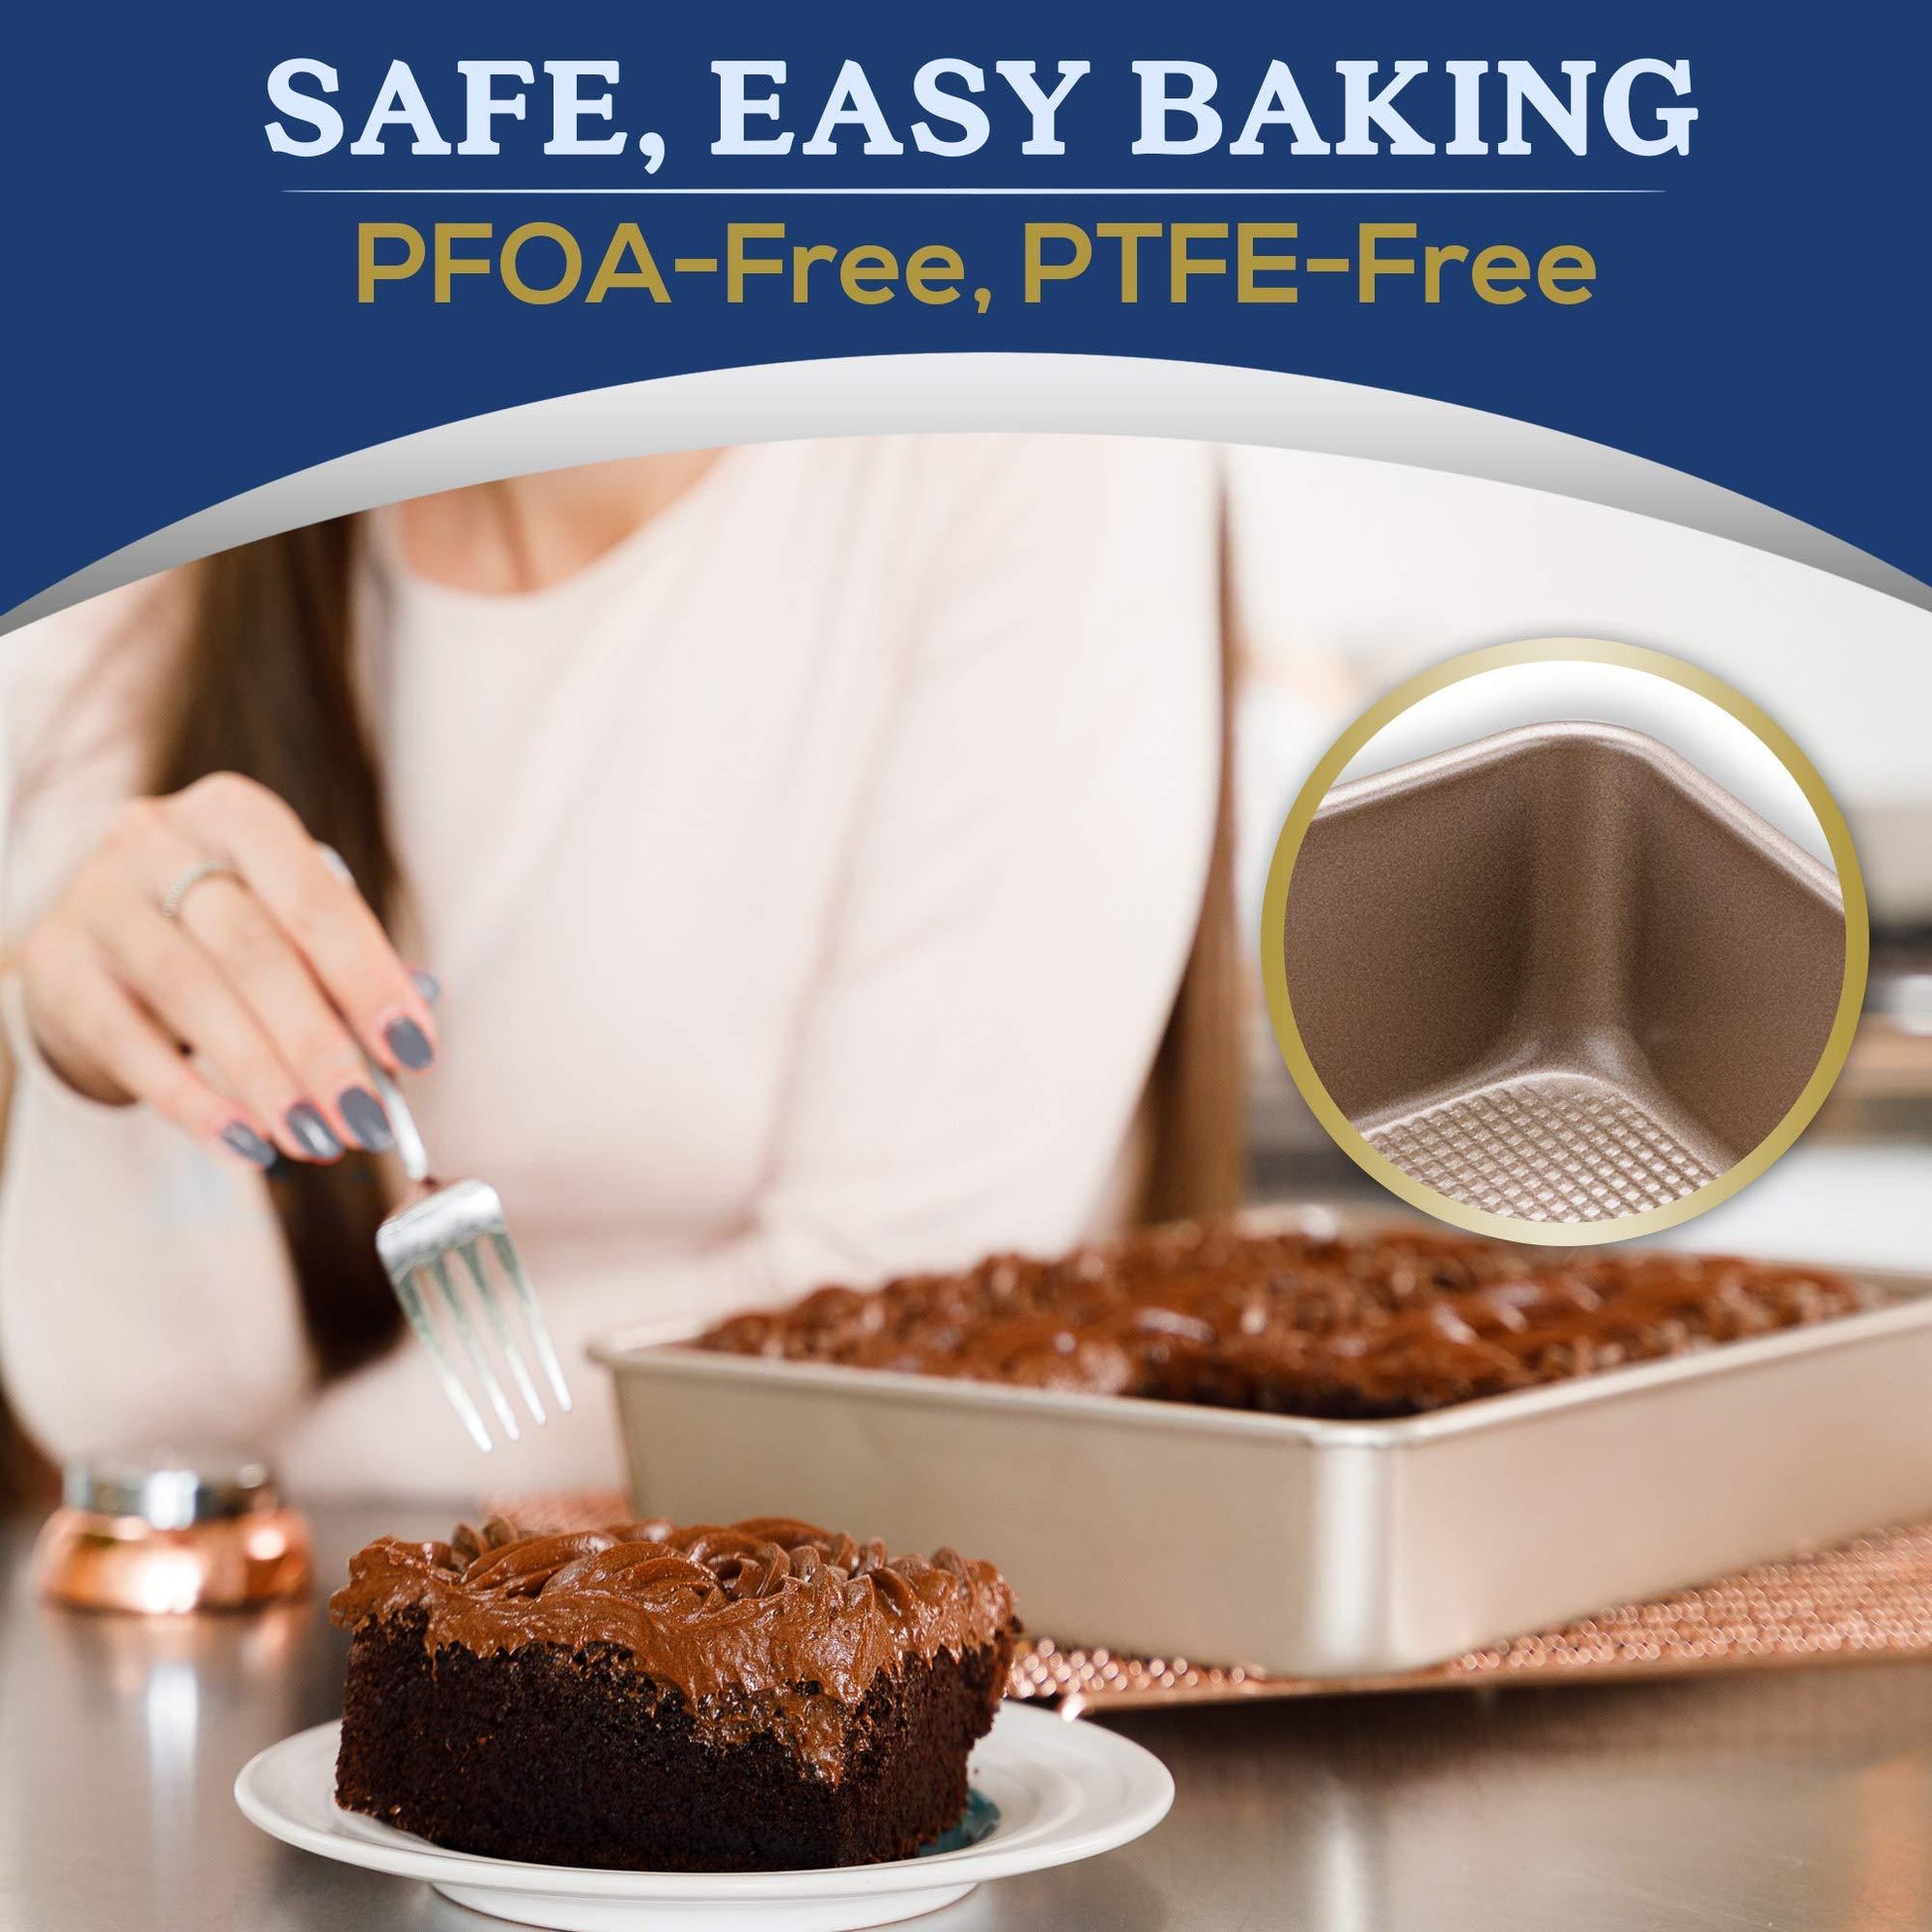 Ultra Cuisine 9x13 Inch Cake Baking And Brownie Pan - Easy Cleaning And Low Maintenance - Elevated Non-Stick Even Baking Experience - Food Safe Coating - Bake Like A Pro For A Lifetime - CookCave